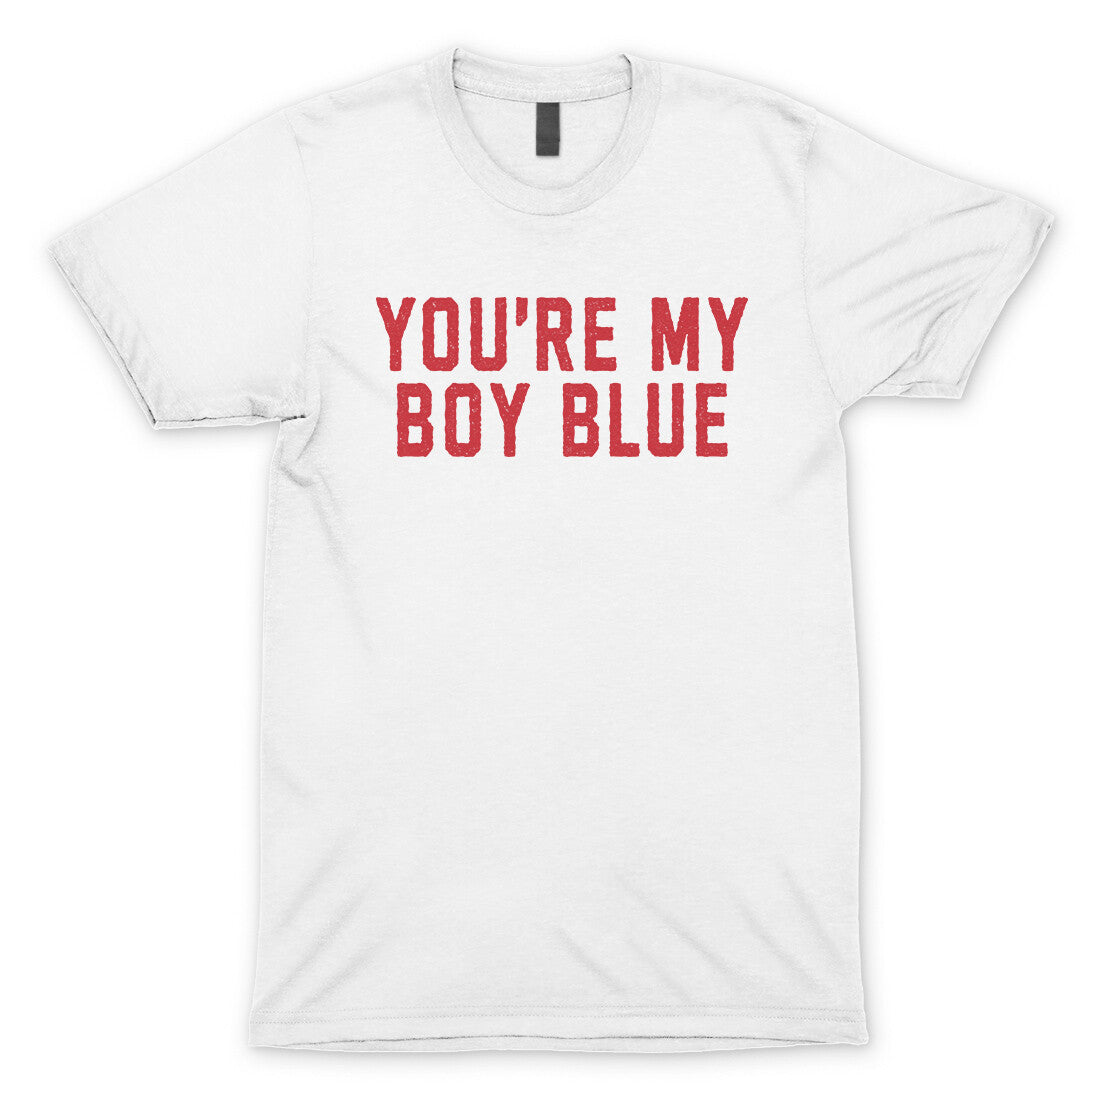 You're my Boy Blue in White Color